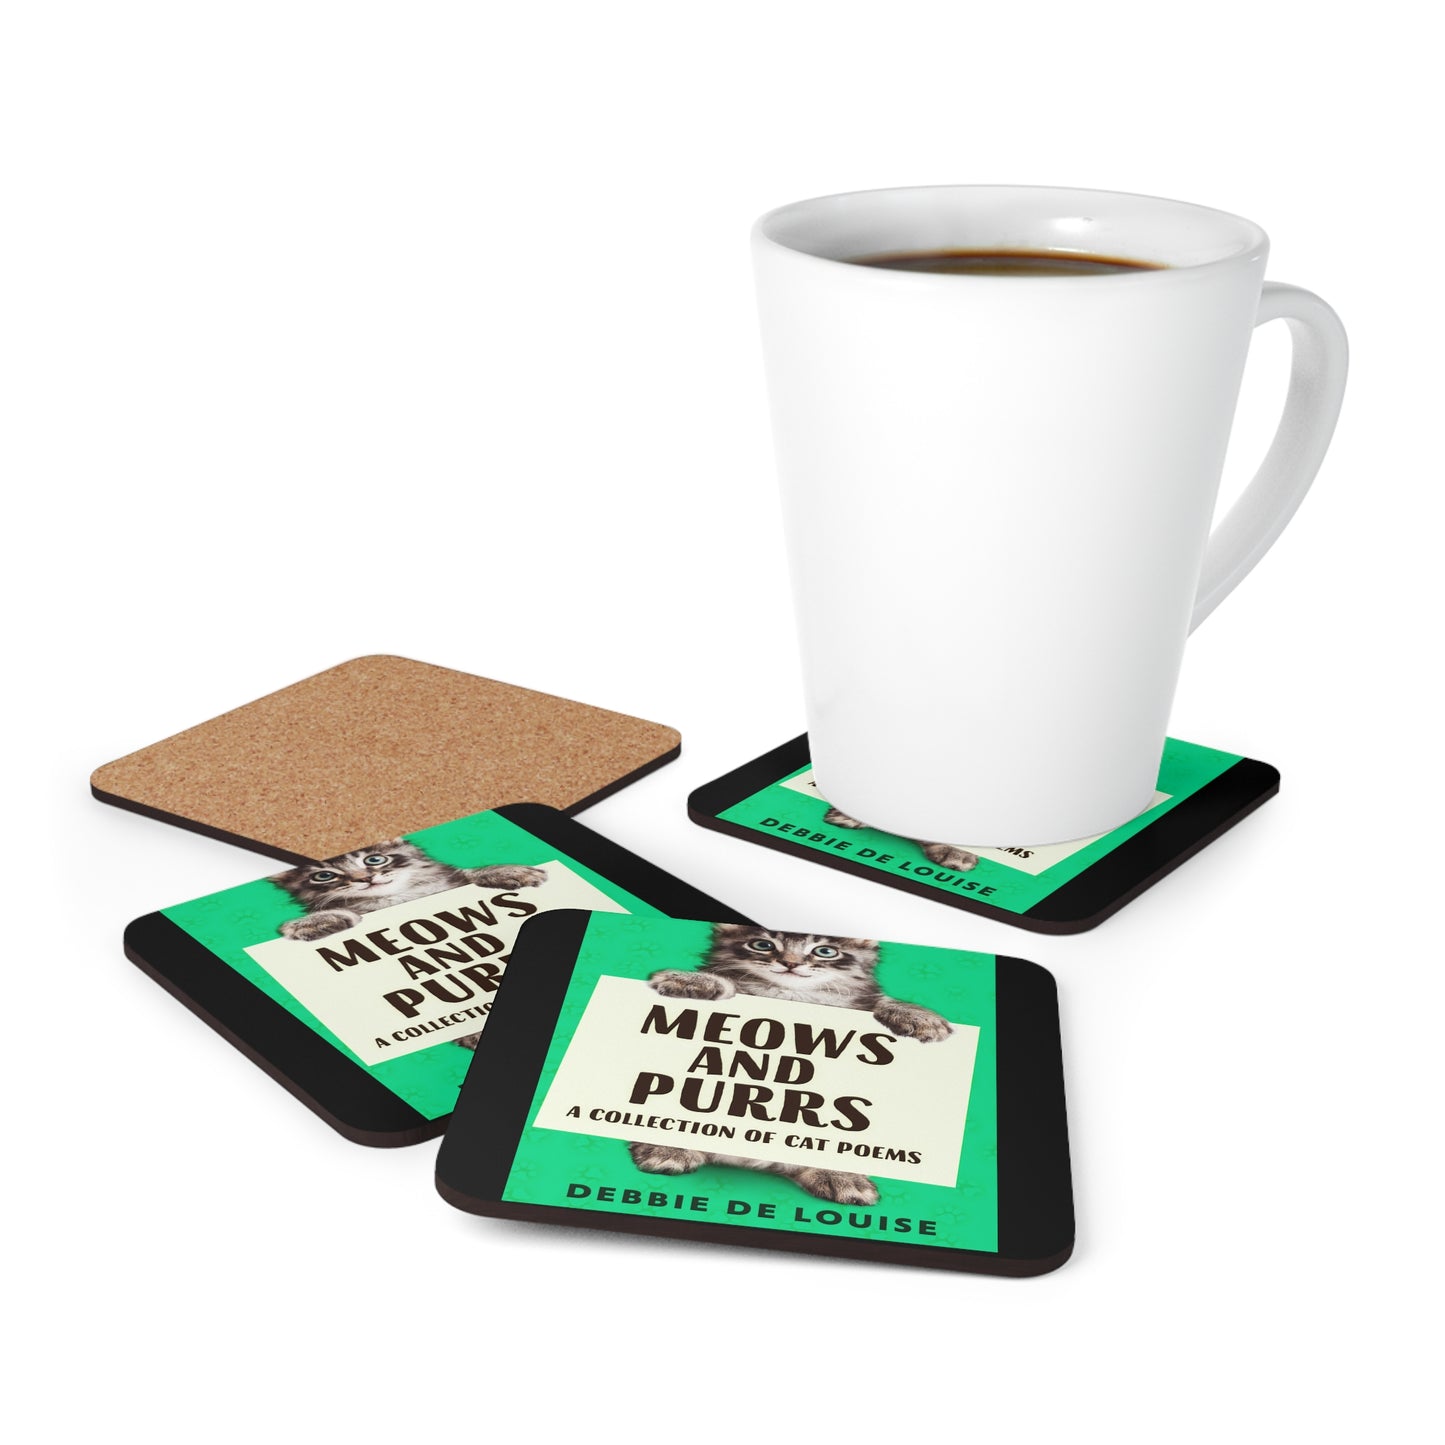 Meows and Purrs - Corkwood Coaster Set